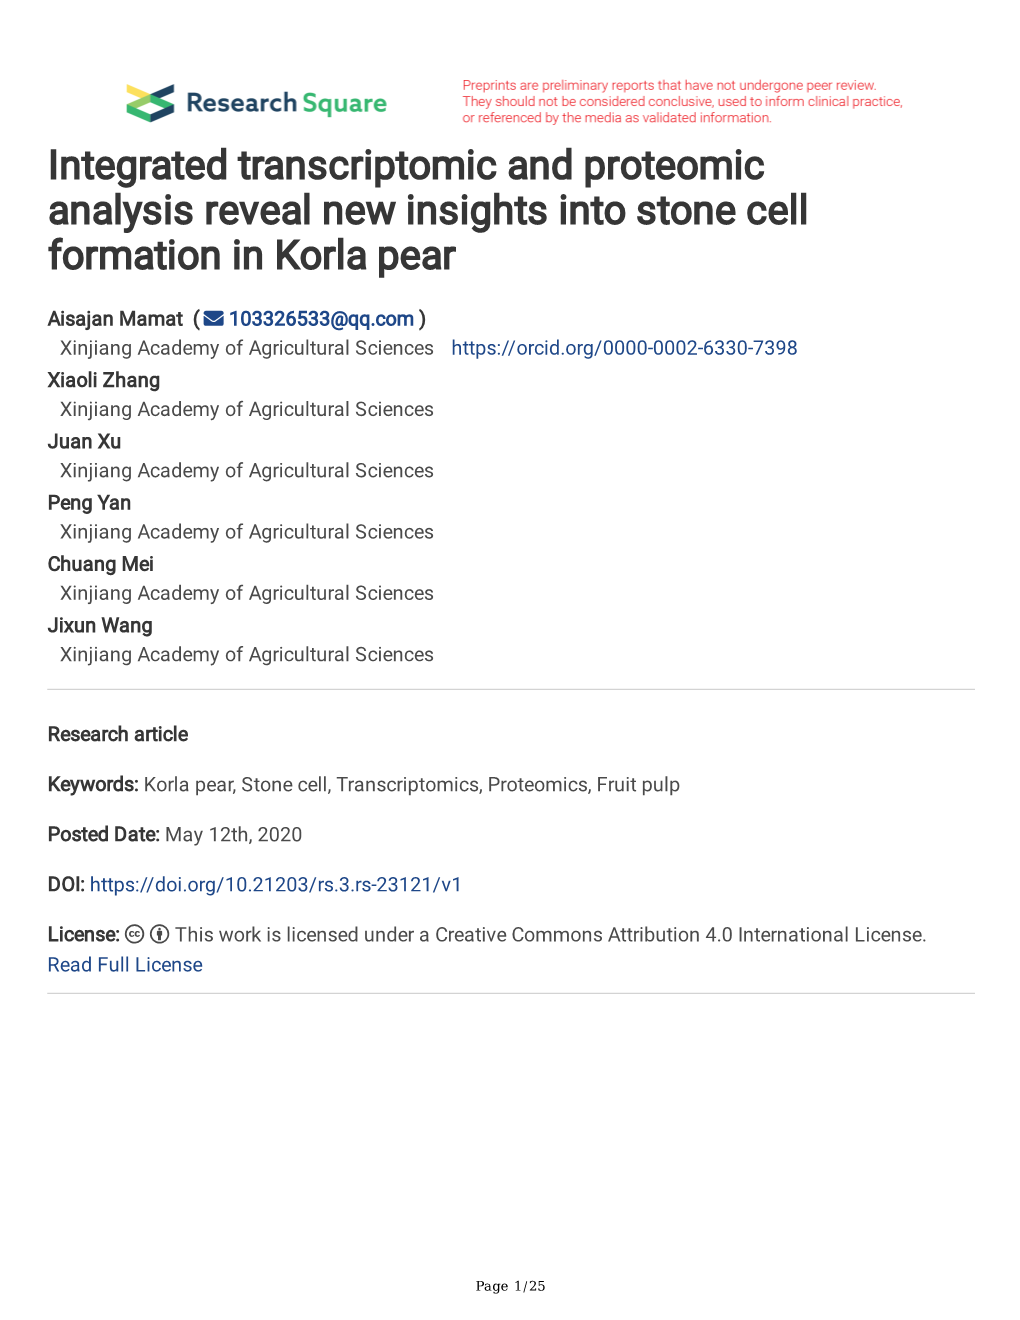 Integrated Transcriptomic and Proteomic Analysis Reveal New Insights Into Stone Cell Formation in Korla Pear